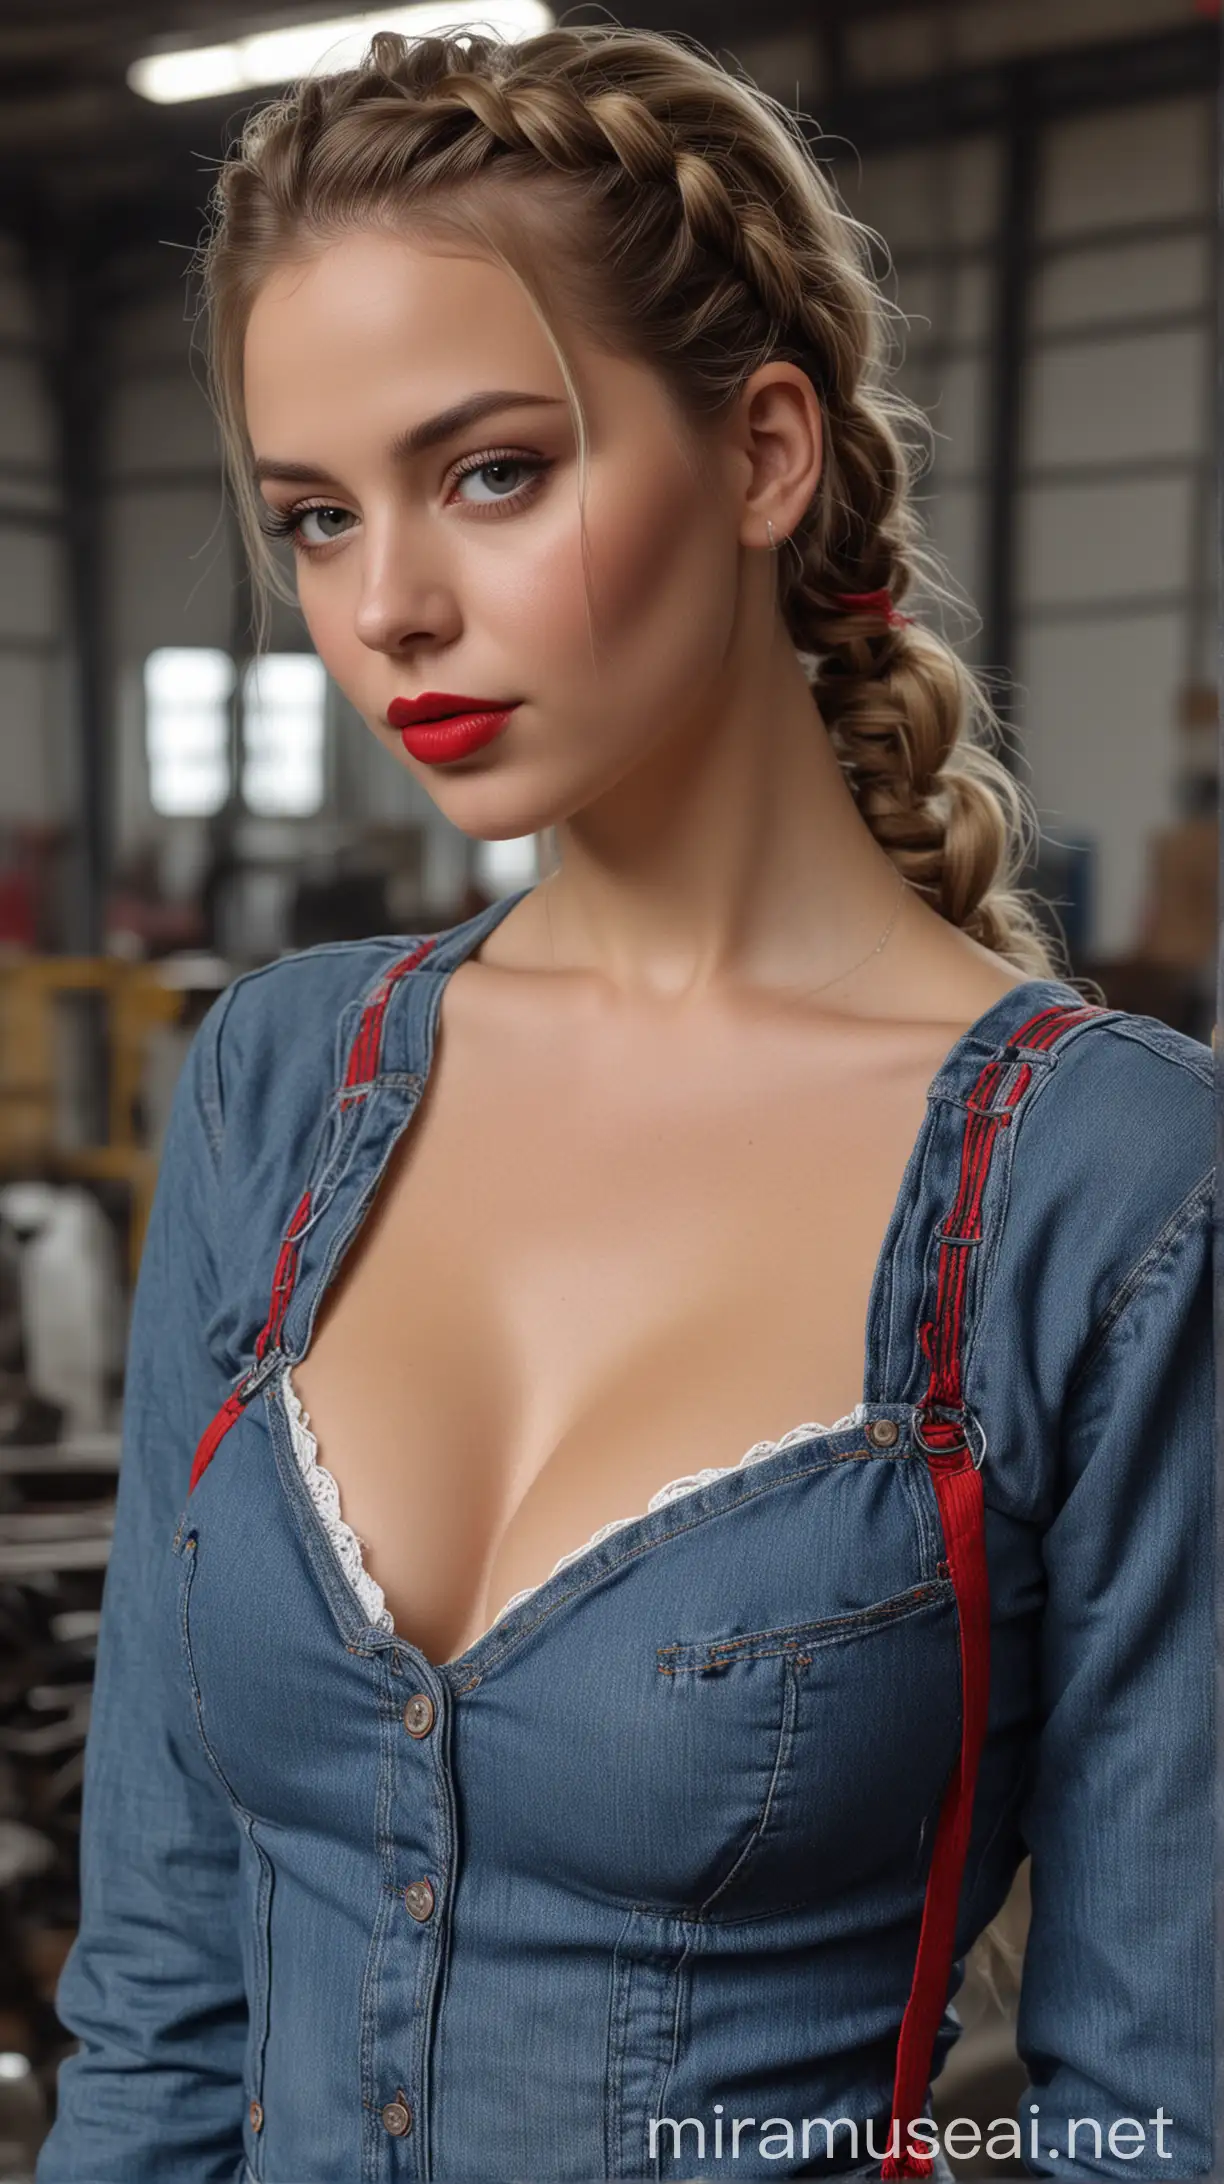 Stylish USA Girl with French Braid Hair in Industrial Factory Setting